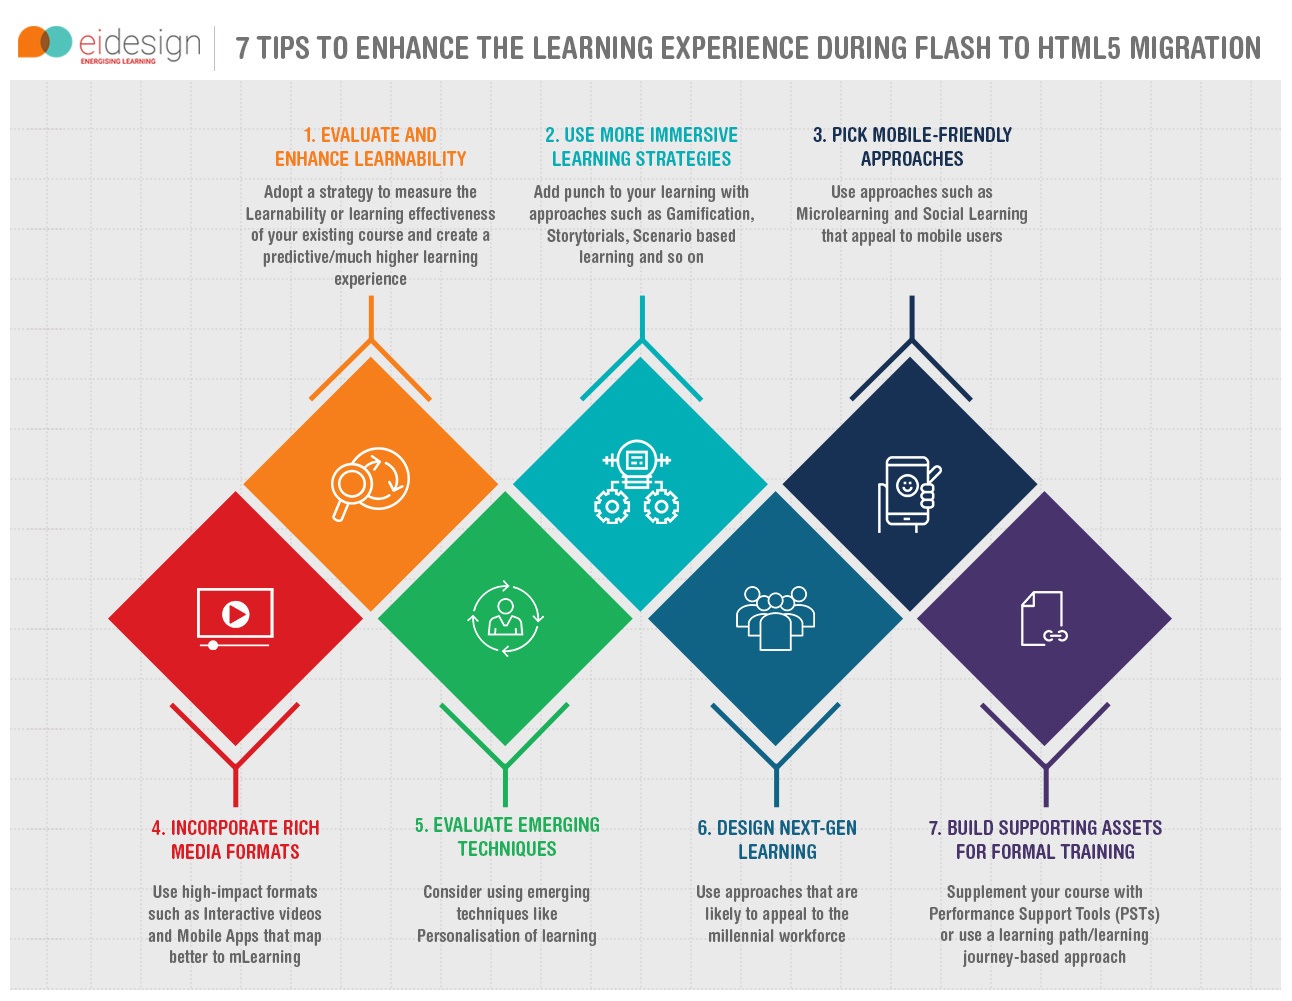 7 Tips to Enhance the Learning Experience During Flash to HTML5 Migration Info Graphic